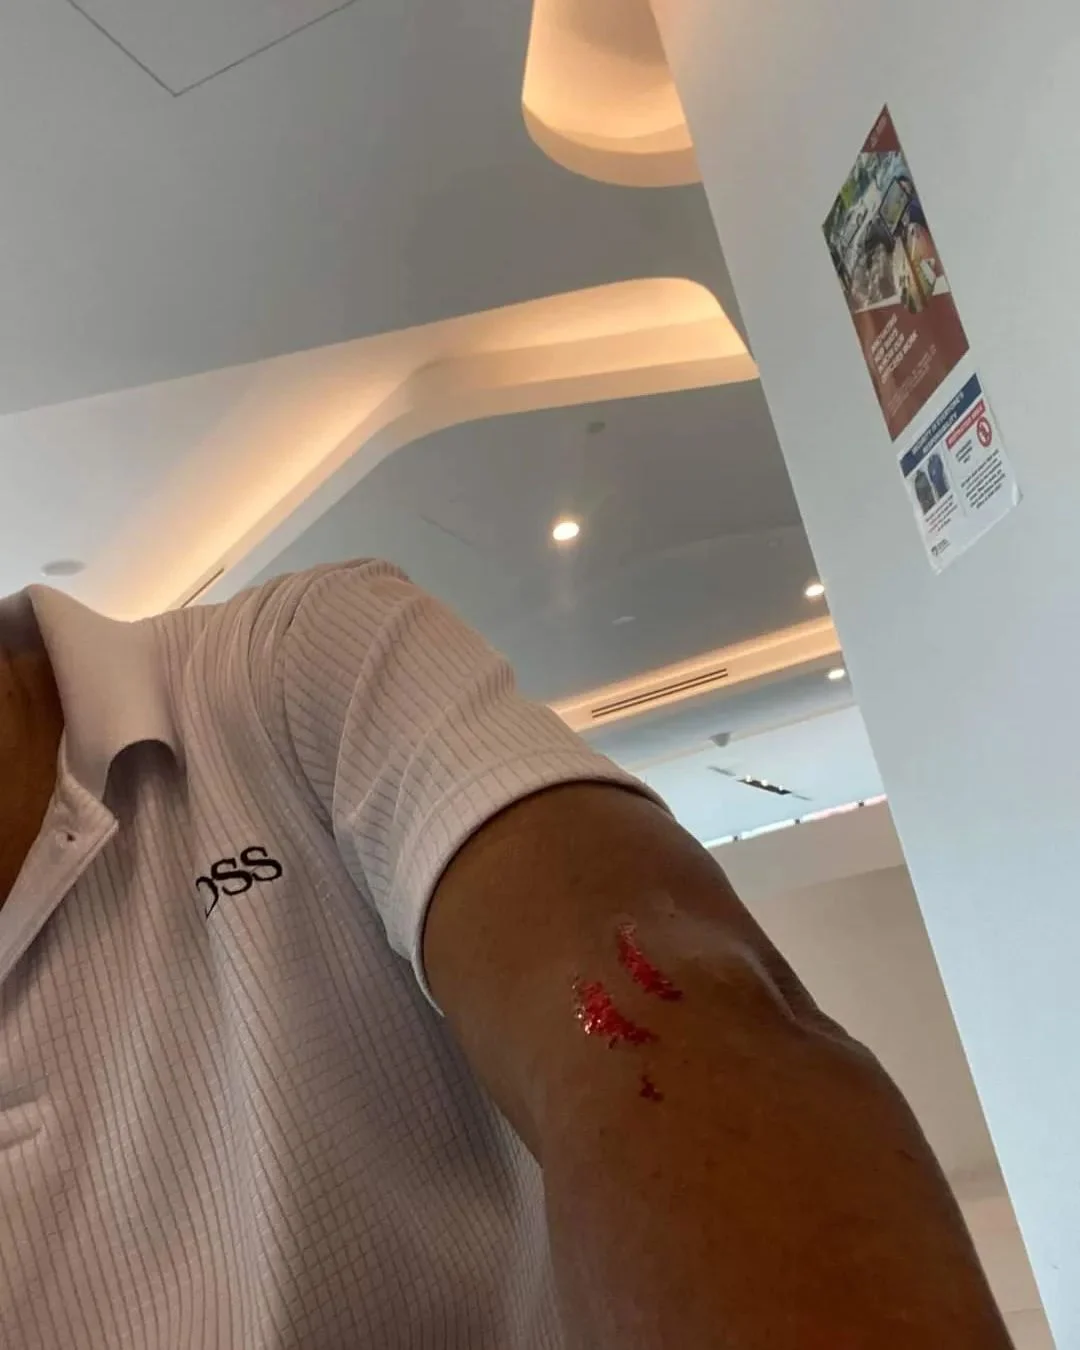 Woman allegedly leaves bloodied scratch on grab driver's arm for making her late